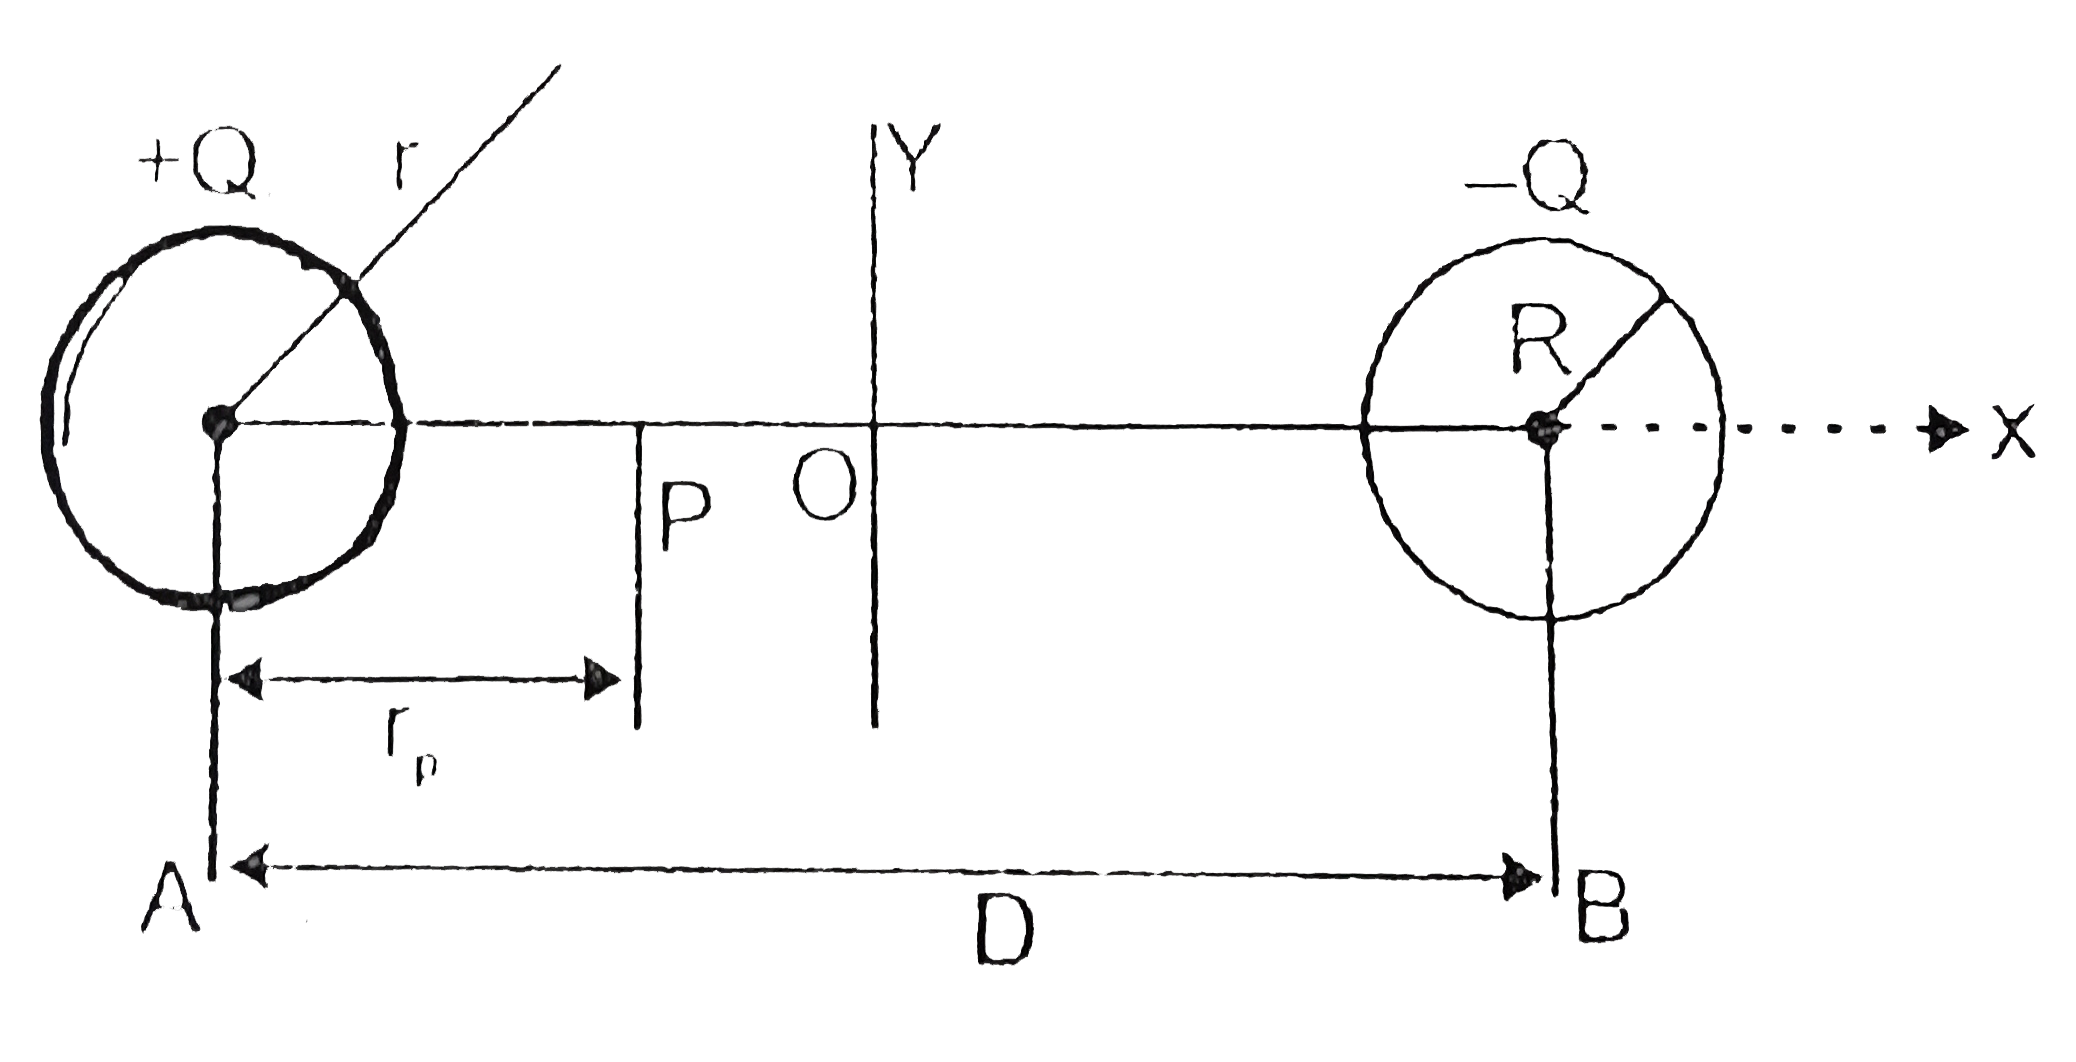 The figure shows two identical long straight metal wires, A and B placed parallel to z-axis the cross sectional radius of each wire is R and the separation of the two wires is Dgt gtR. The electric potential at a perpendicular distance rgtR from a long straight wire due to that wire is given by V=-kln((r)/(R)) where k is a positive constant. the wires carry charges +Q and -Q per unit length respectively. Then   Q. As D gt gt R, the electric field due to a long straight wire has cylindrical symmetry. The charge per unit length of the wire is